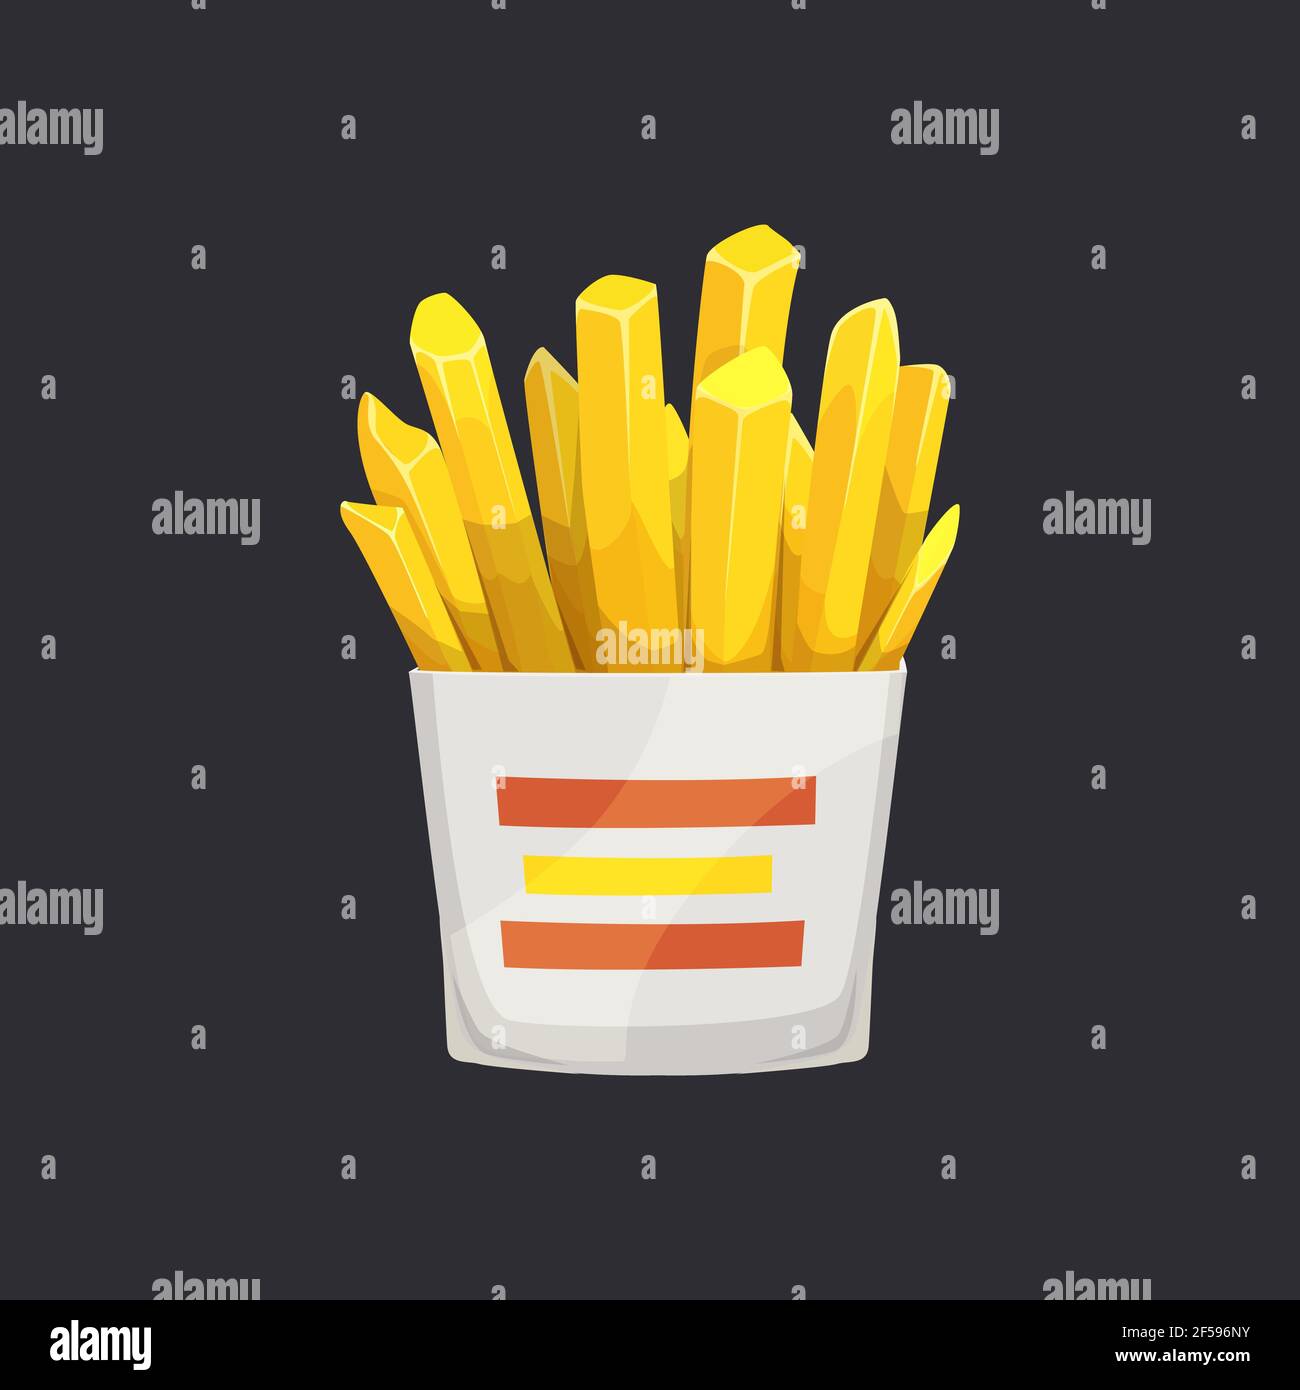 Fried potatoes in box isolated fastfood snack icon Stock Vector